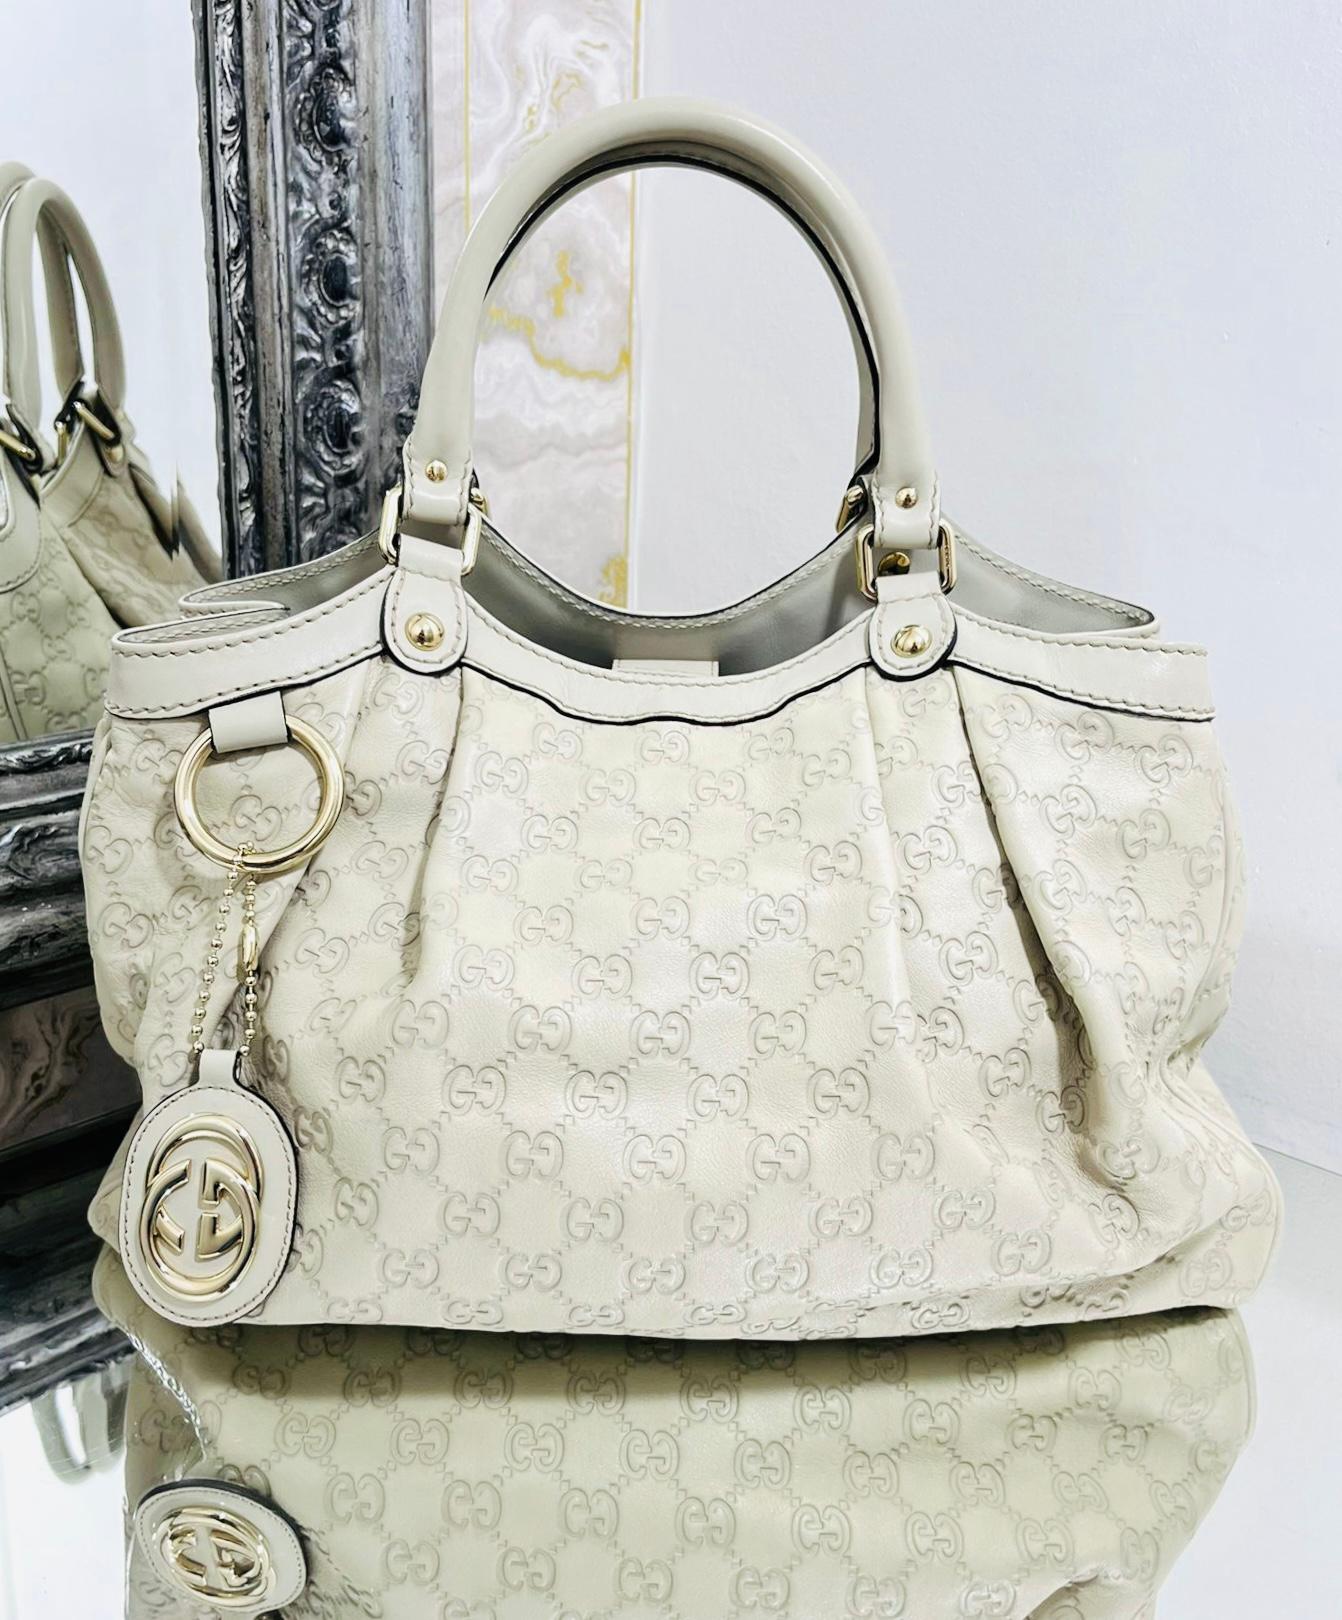 Gucci Guccissima GG Sukey Leather Bag

Ivory tote bag designed with GG monogram embossed.

Featuring dual top rolled handles and magnetic closure.

Detailed with gold GG logo leather detachable charm.

Magnetic corners and black logo interior with